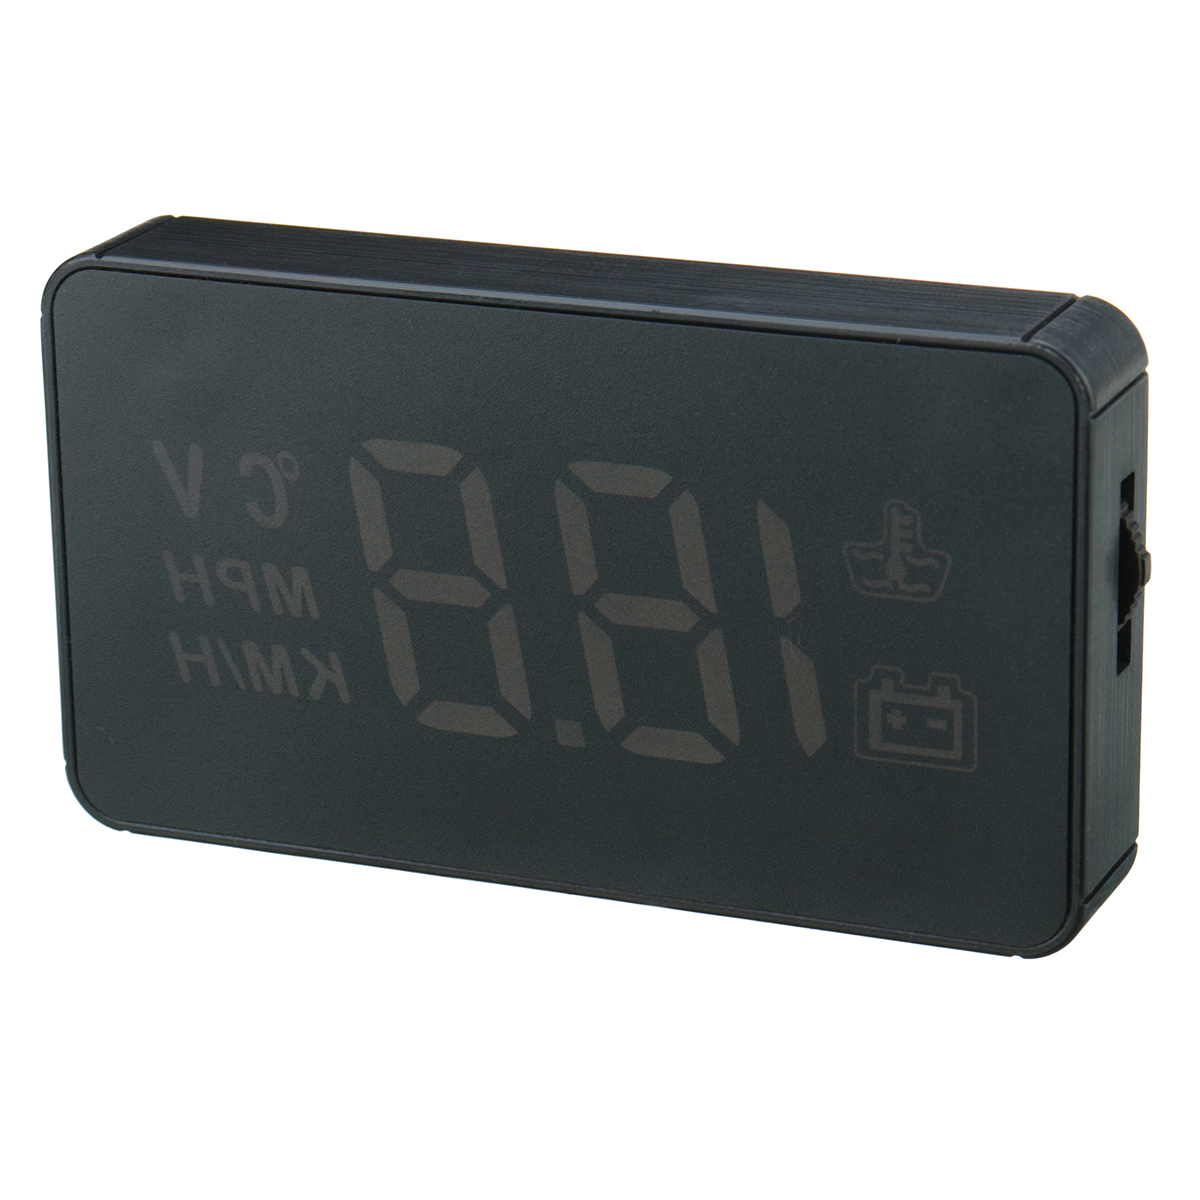 3.5 Inch Car HUD Head up Display Windshield Projecter OBD2 Speed RPM Water Temperature Voltage Display